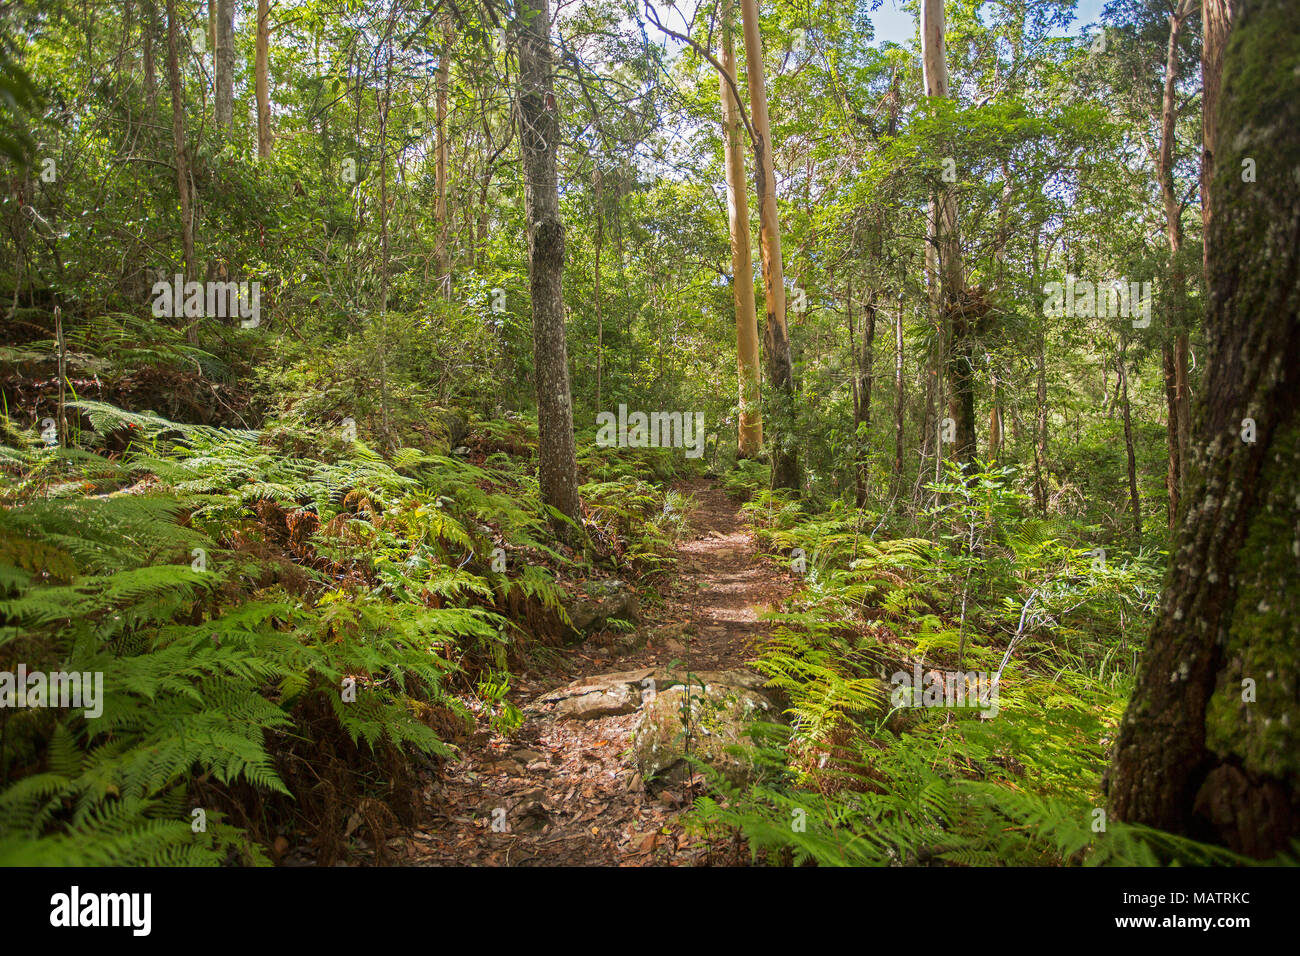 Dense emerald forests with ferns and bracken severed by narrow walking trail in Conondale Ranges National Park  Queensland Australia Stock Photo